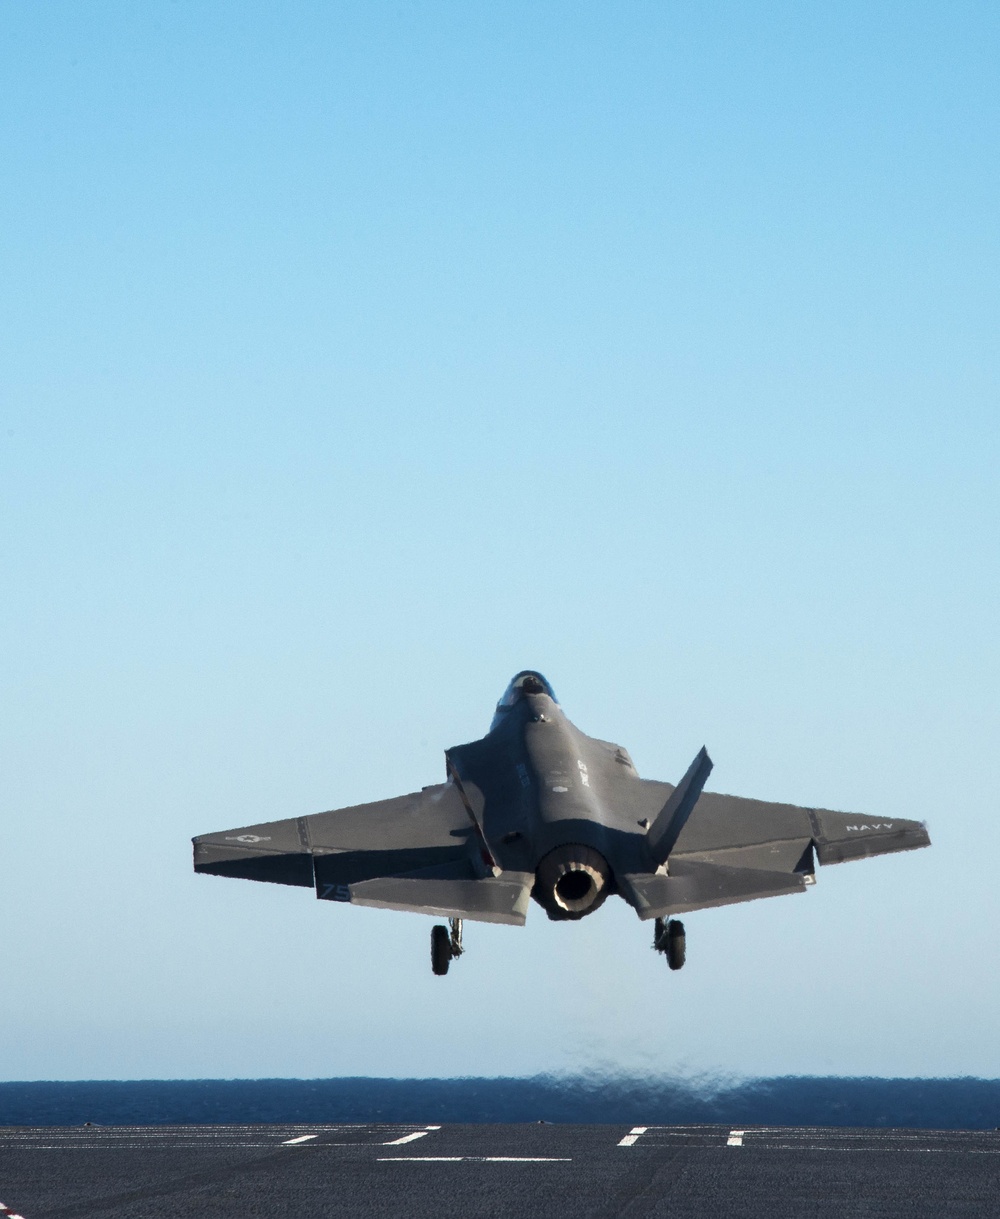 F-35C Joint Strike Fighter conducts its first launch from an aircraft carrier